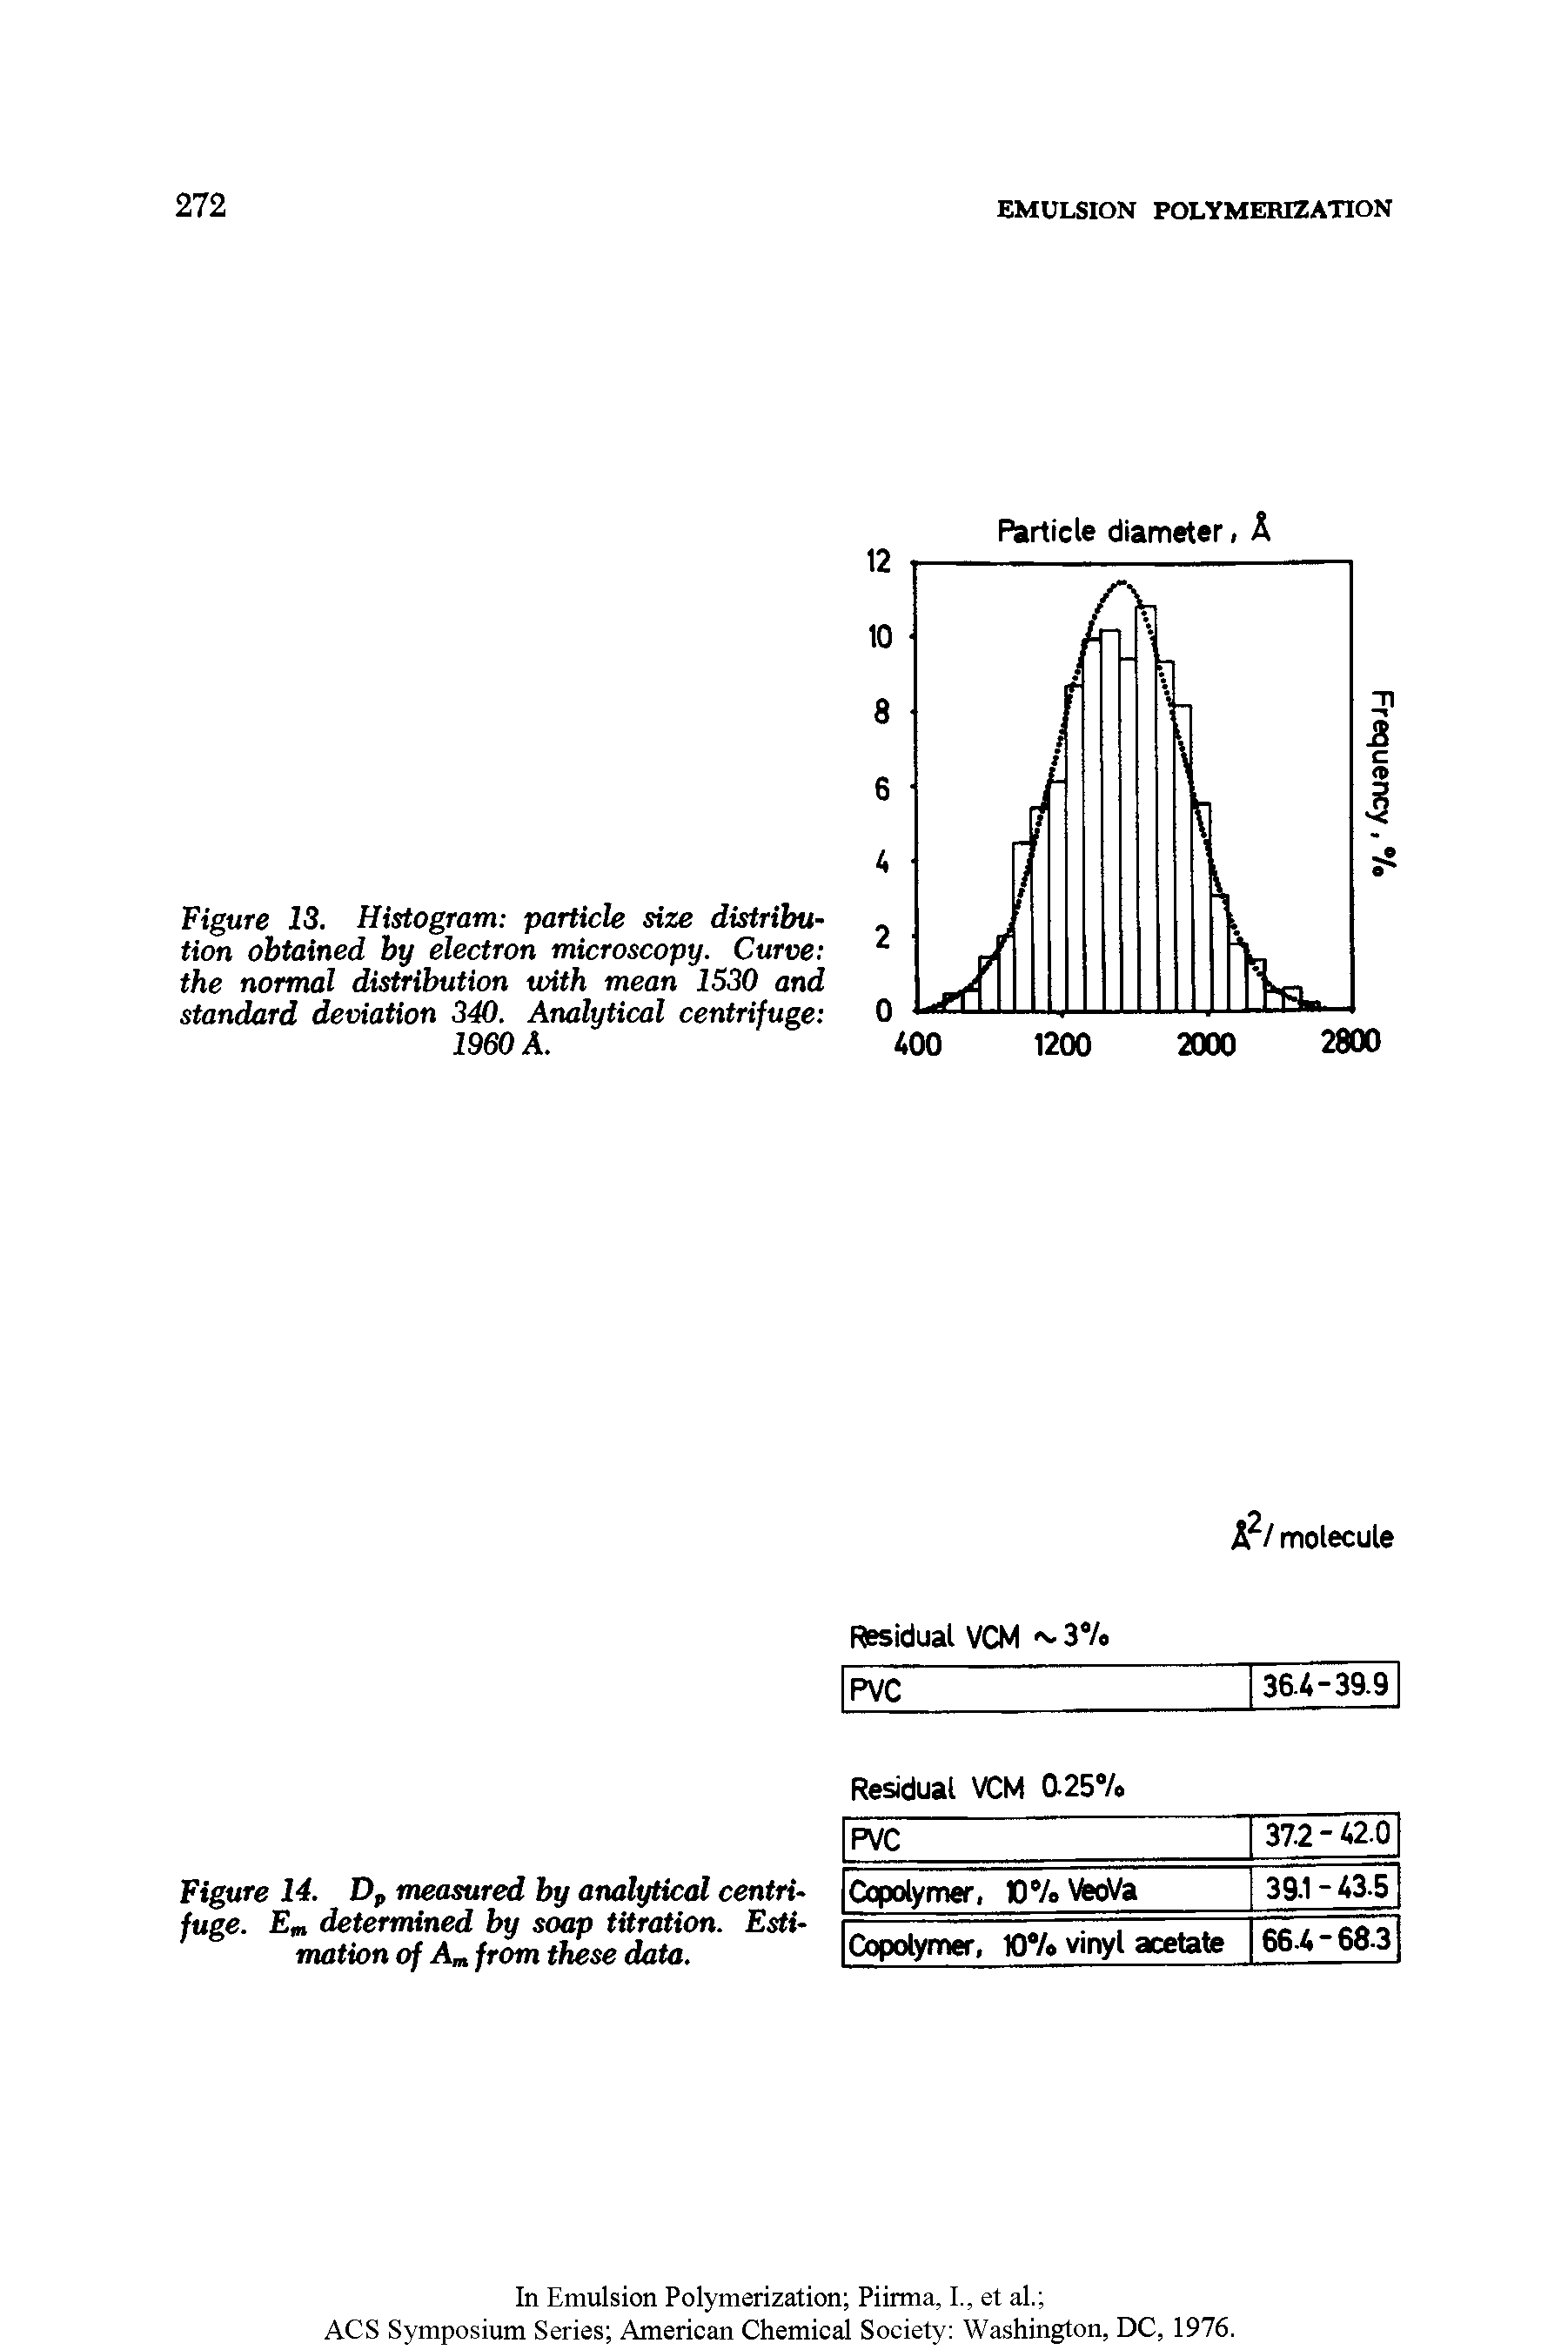 Figure 13. Histogram particle size distribution obtained by electron microscopy. Curve the normal distribution with mean 1530 and standard deviation 340. Analytical centrifuge I960 A.